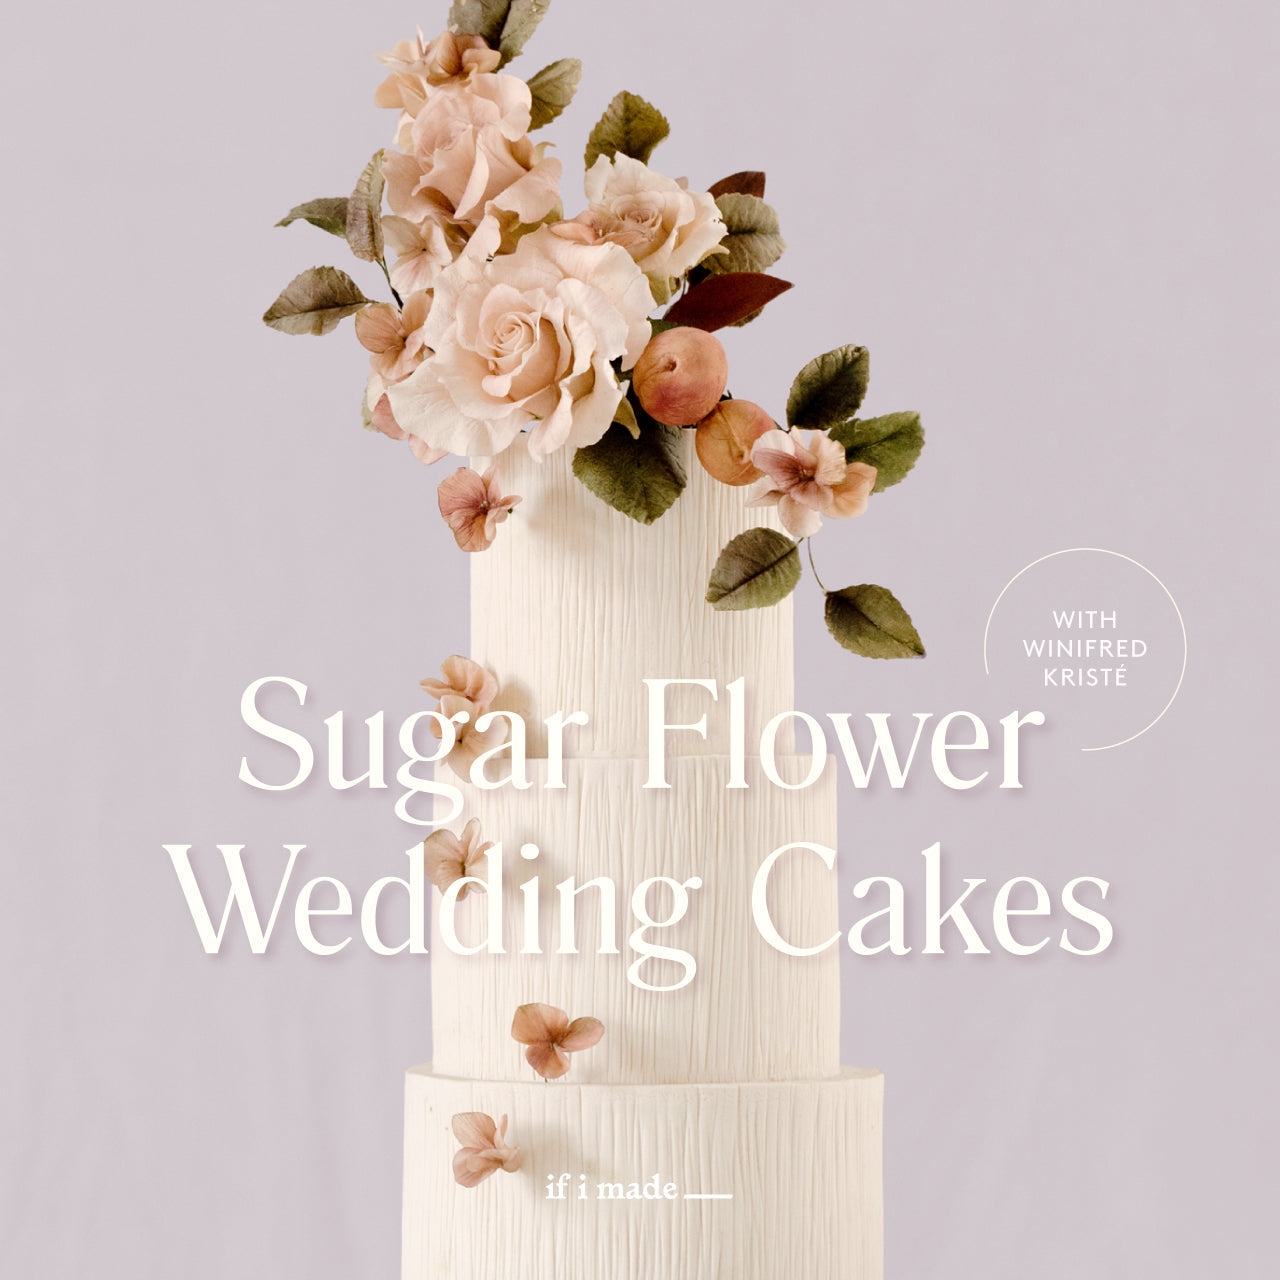 Sugar Flower Wedding Cakes with Winifred Kriste (SPP) - 20 payments of $69